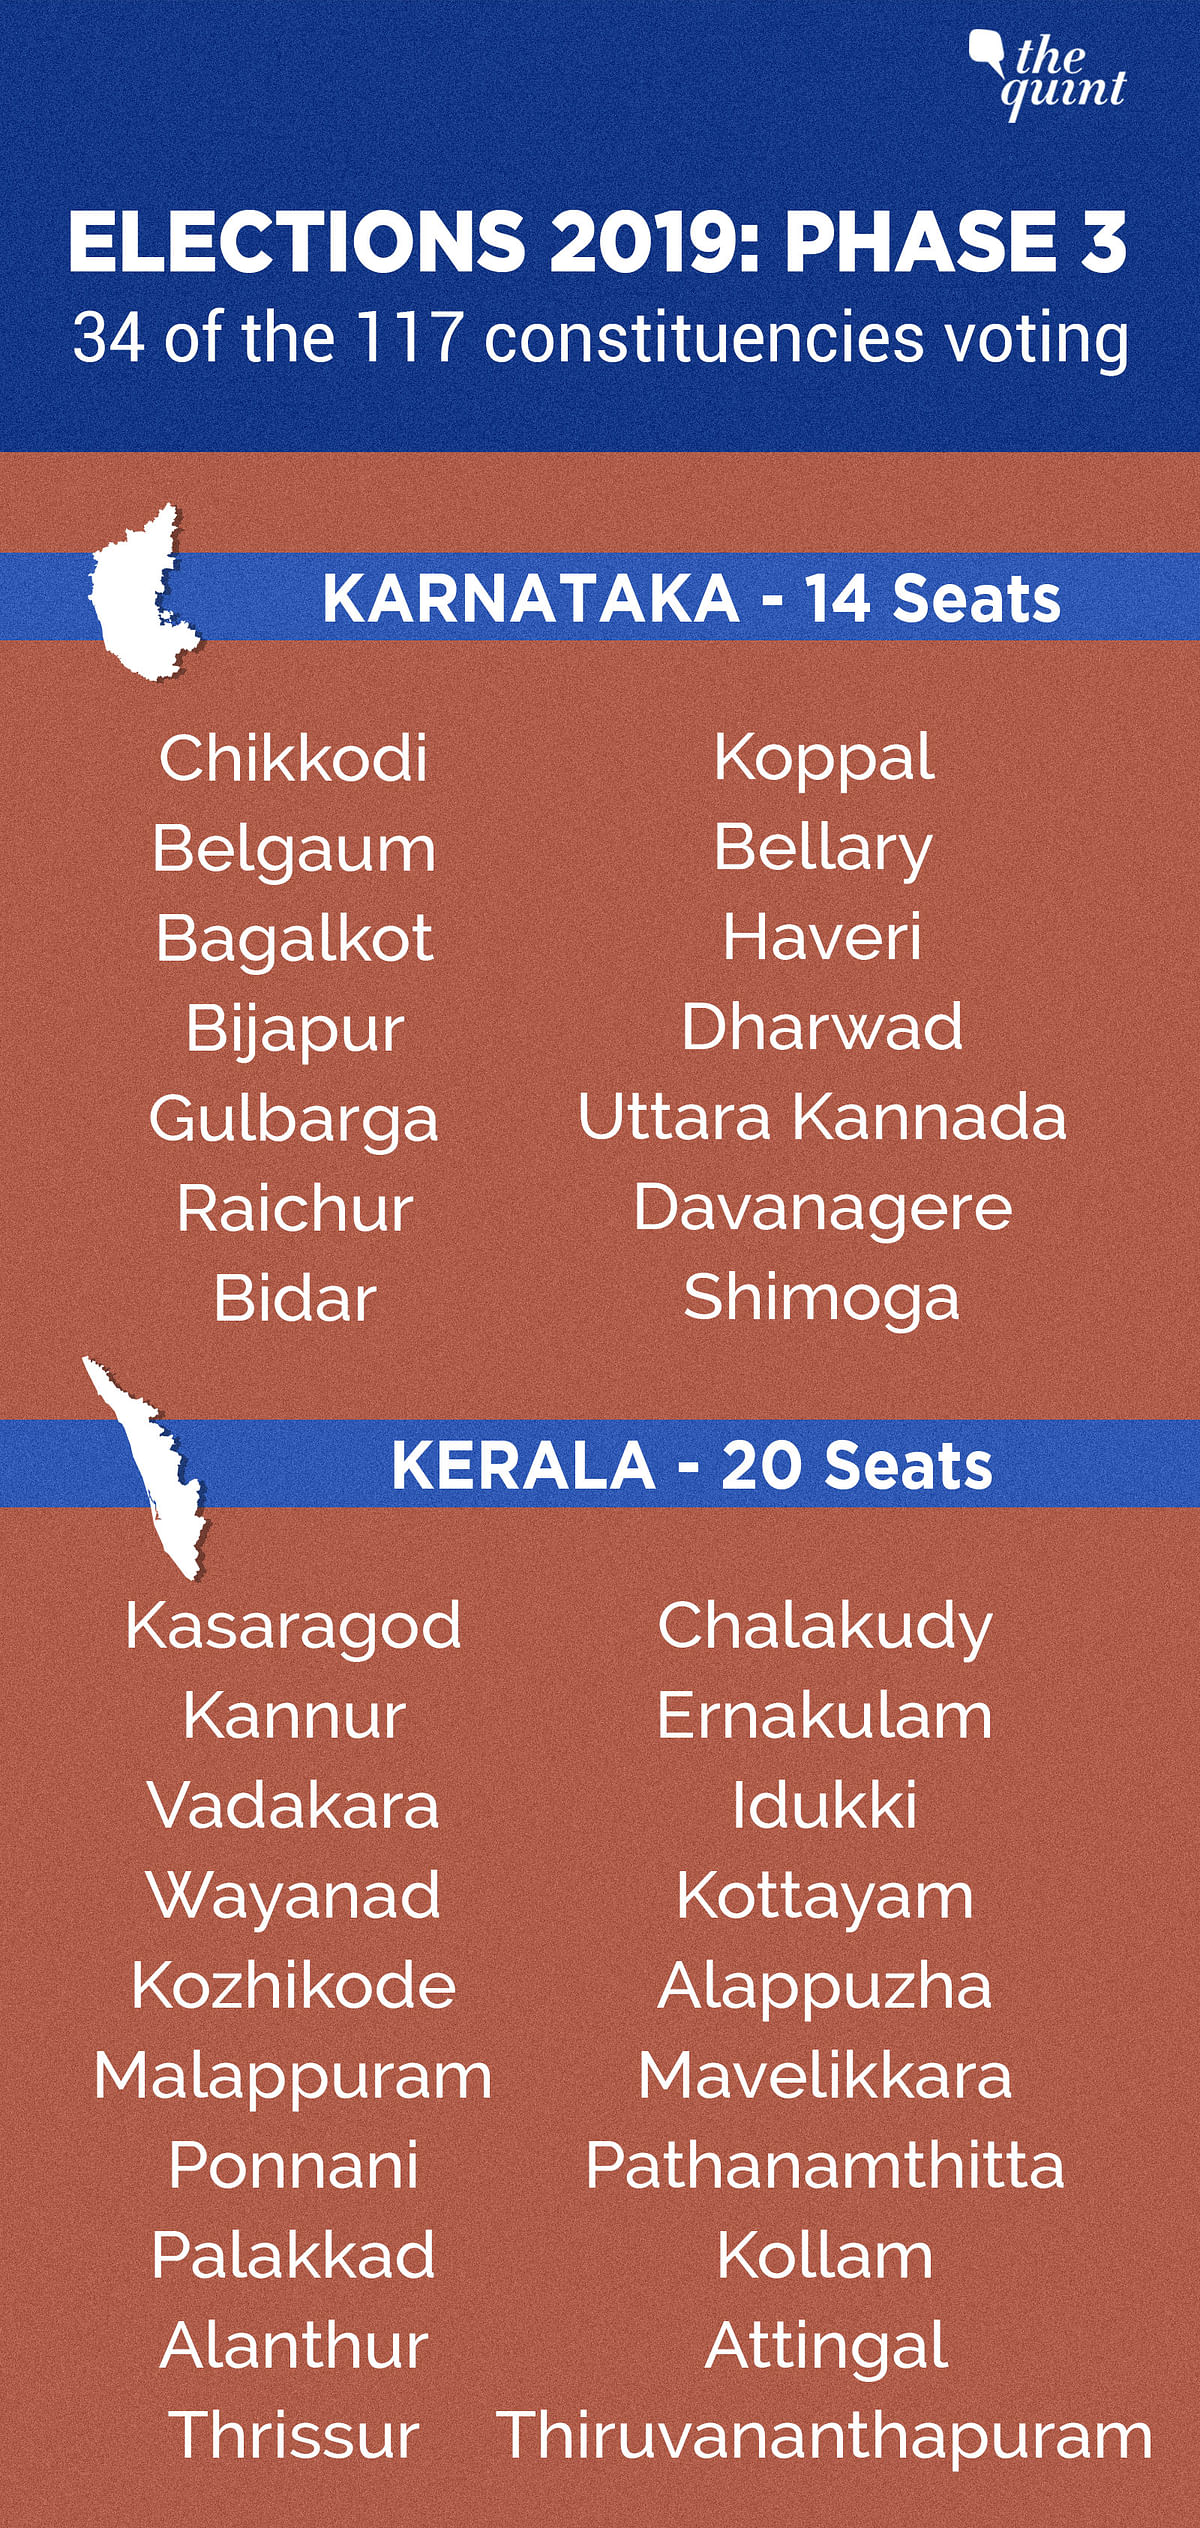 117 constituencies across 13 states & 2 Union Territories will vote on 23 April in the third phase of LS polls.